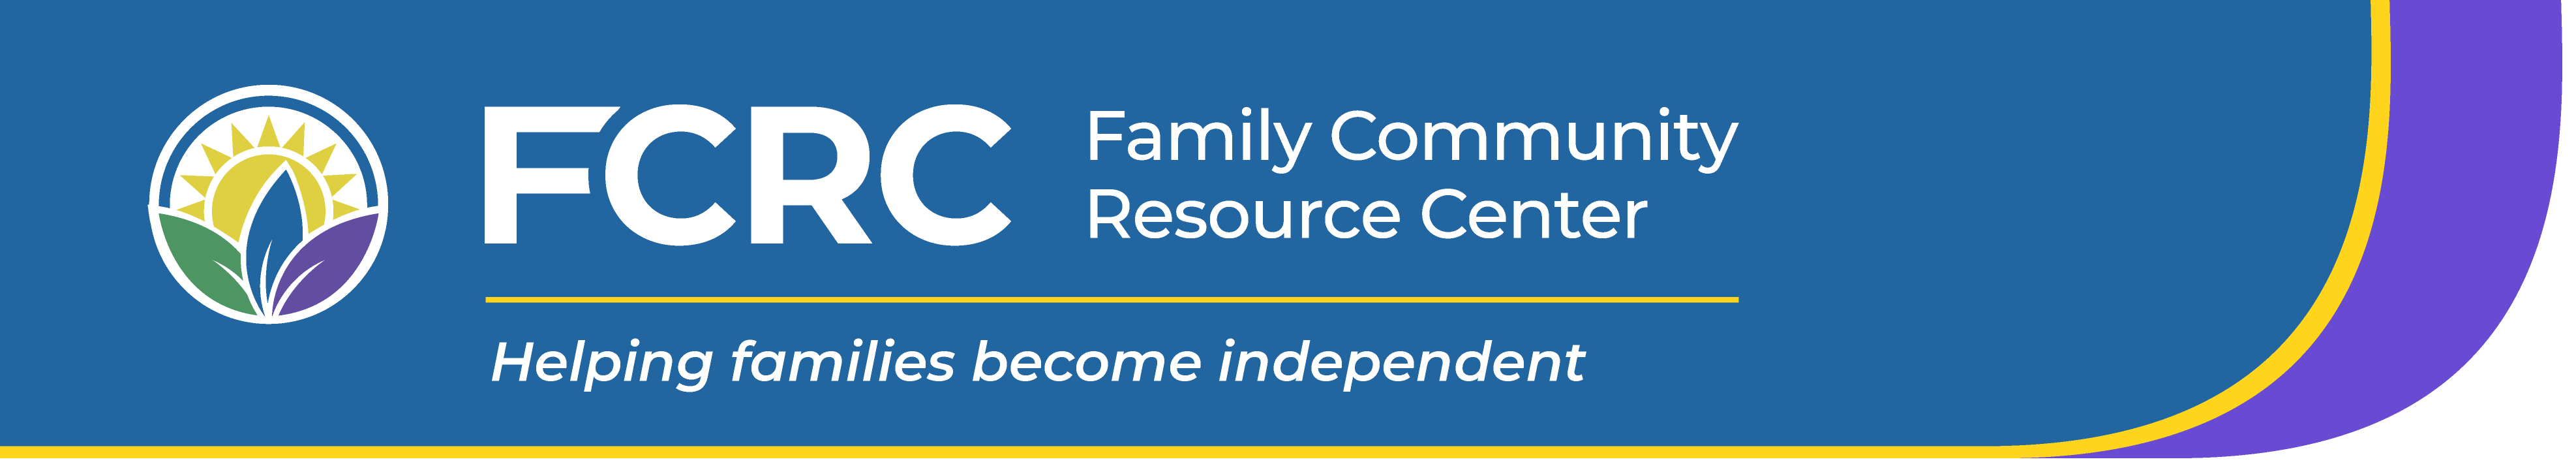 family community resource center - helping families become independent